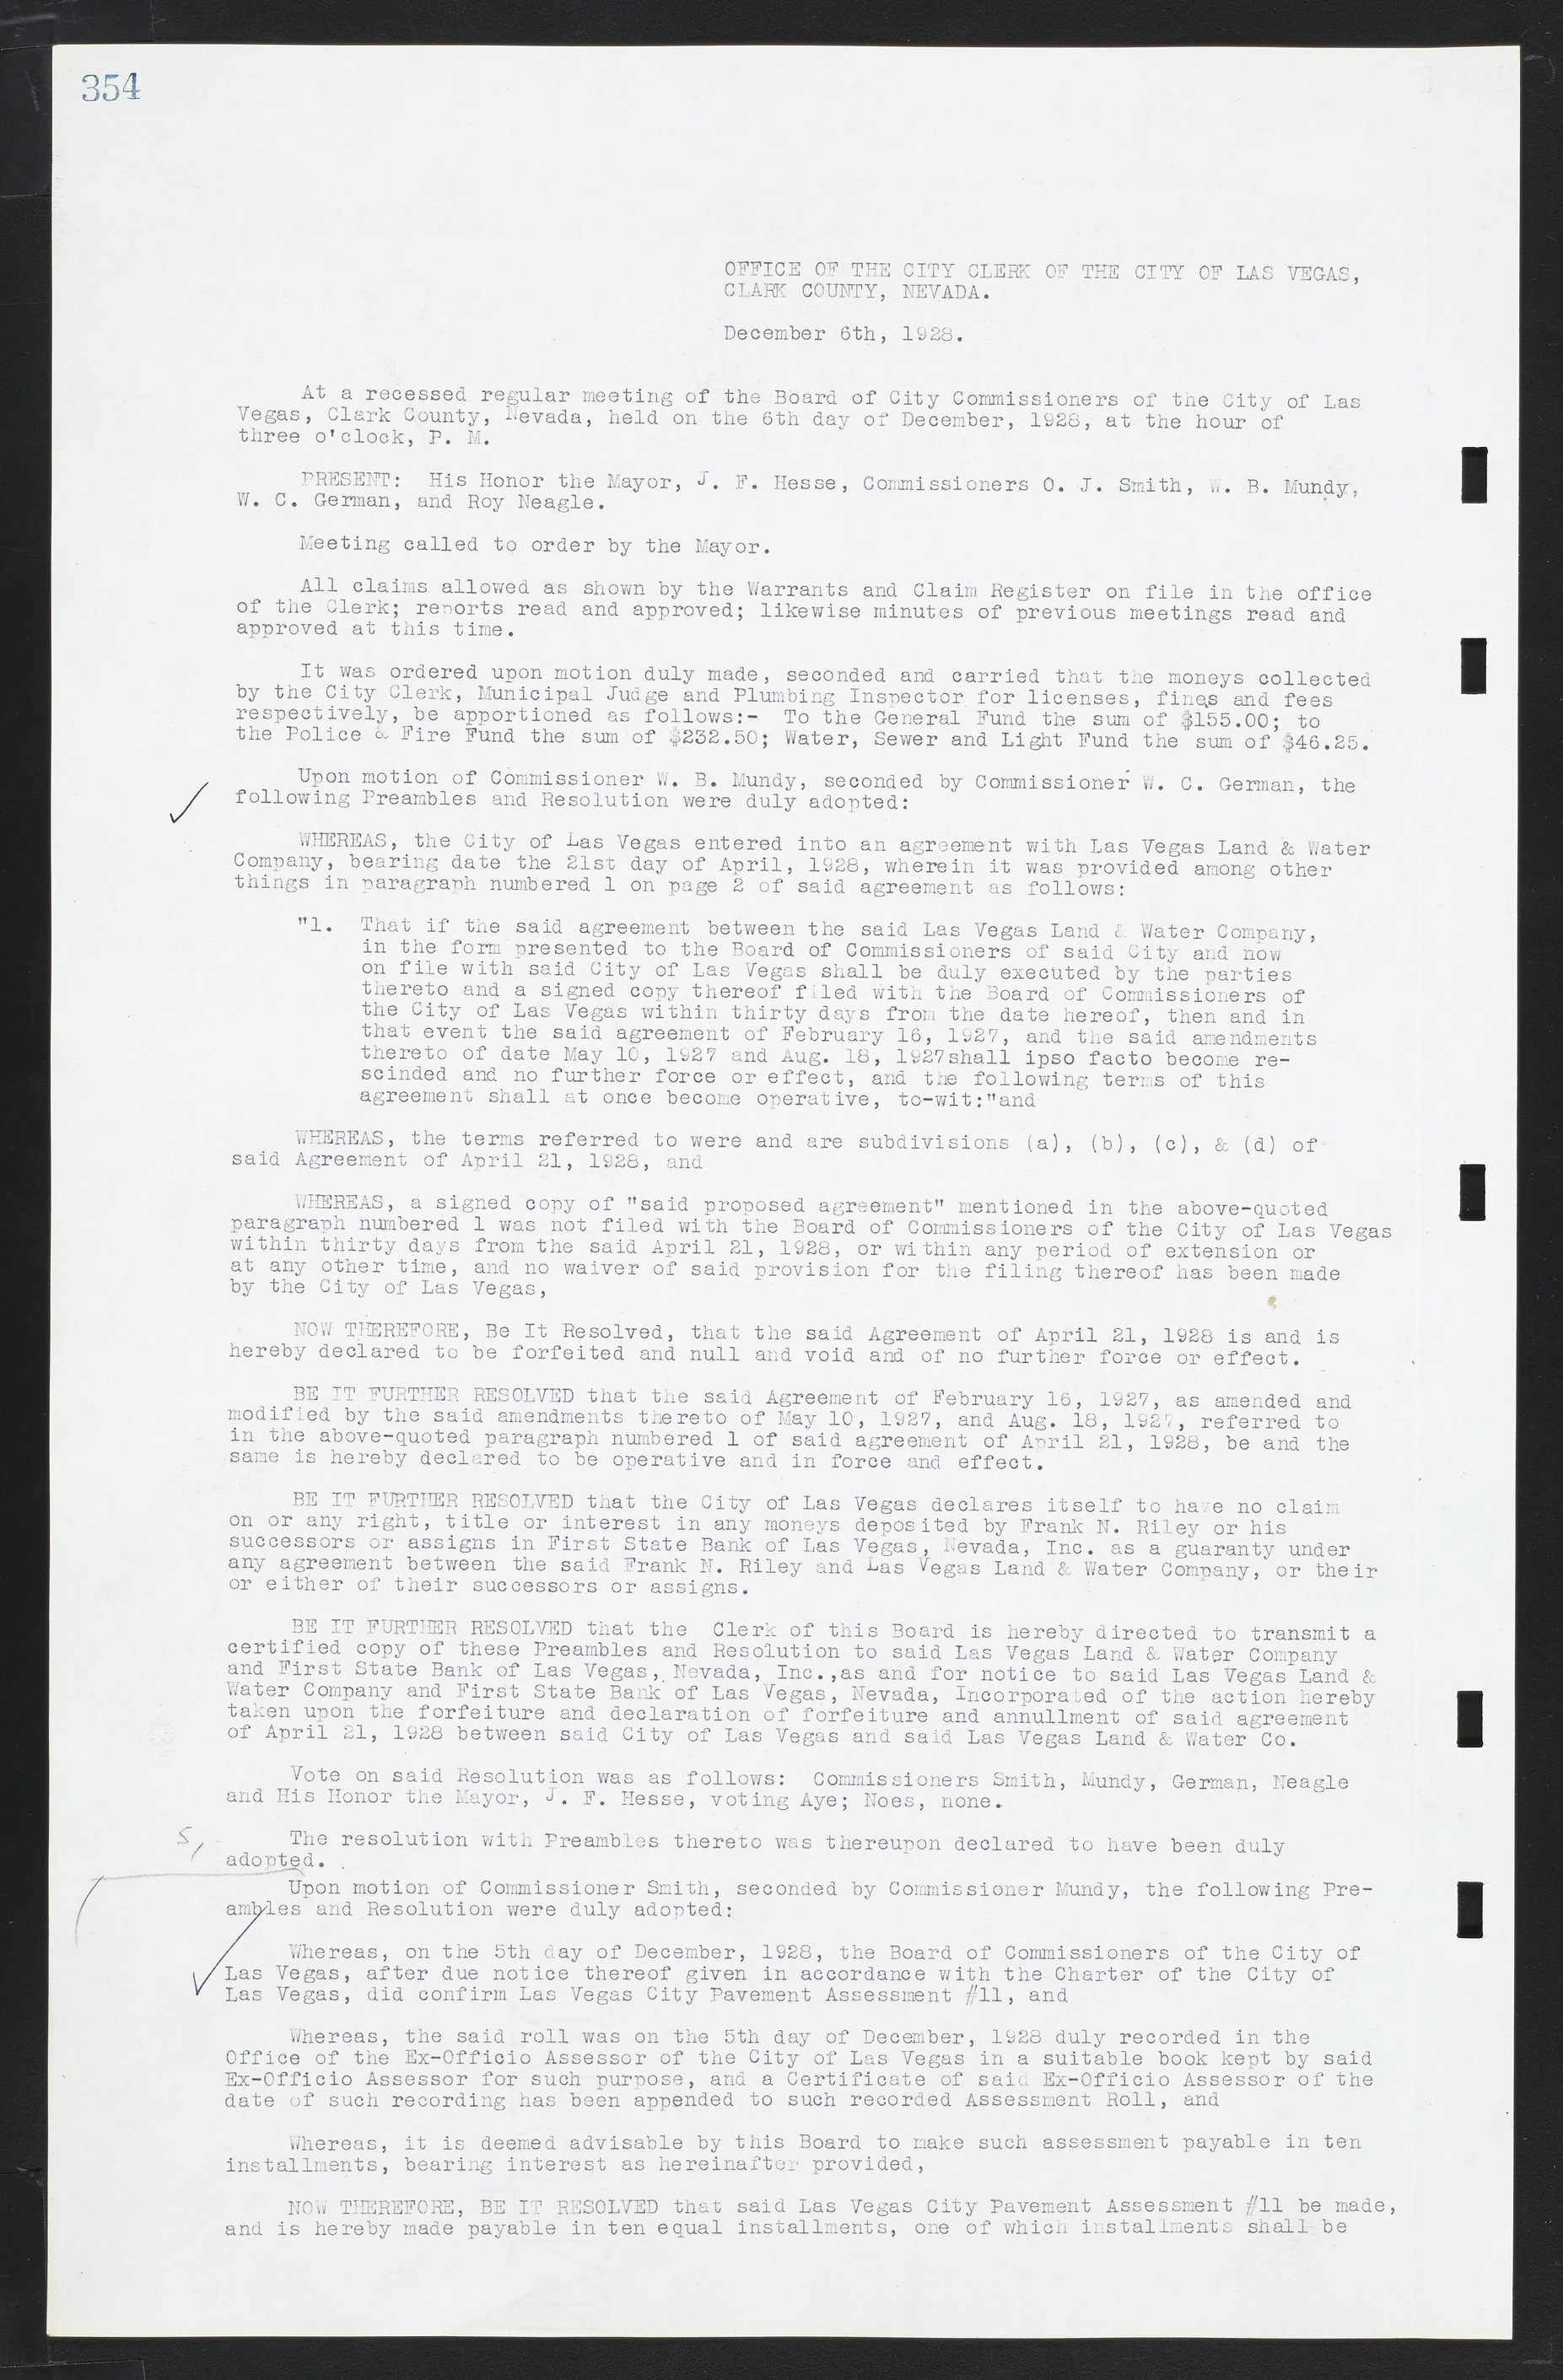 Las Vegas City Commission Minutes, March 1, 1922 to May 10, 1929, lvc000002-363